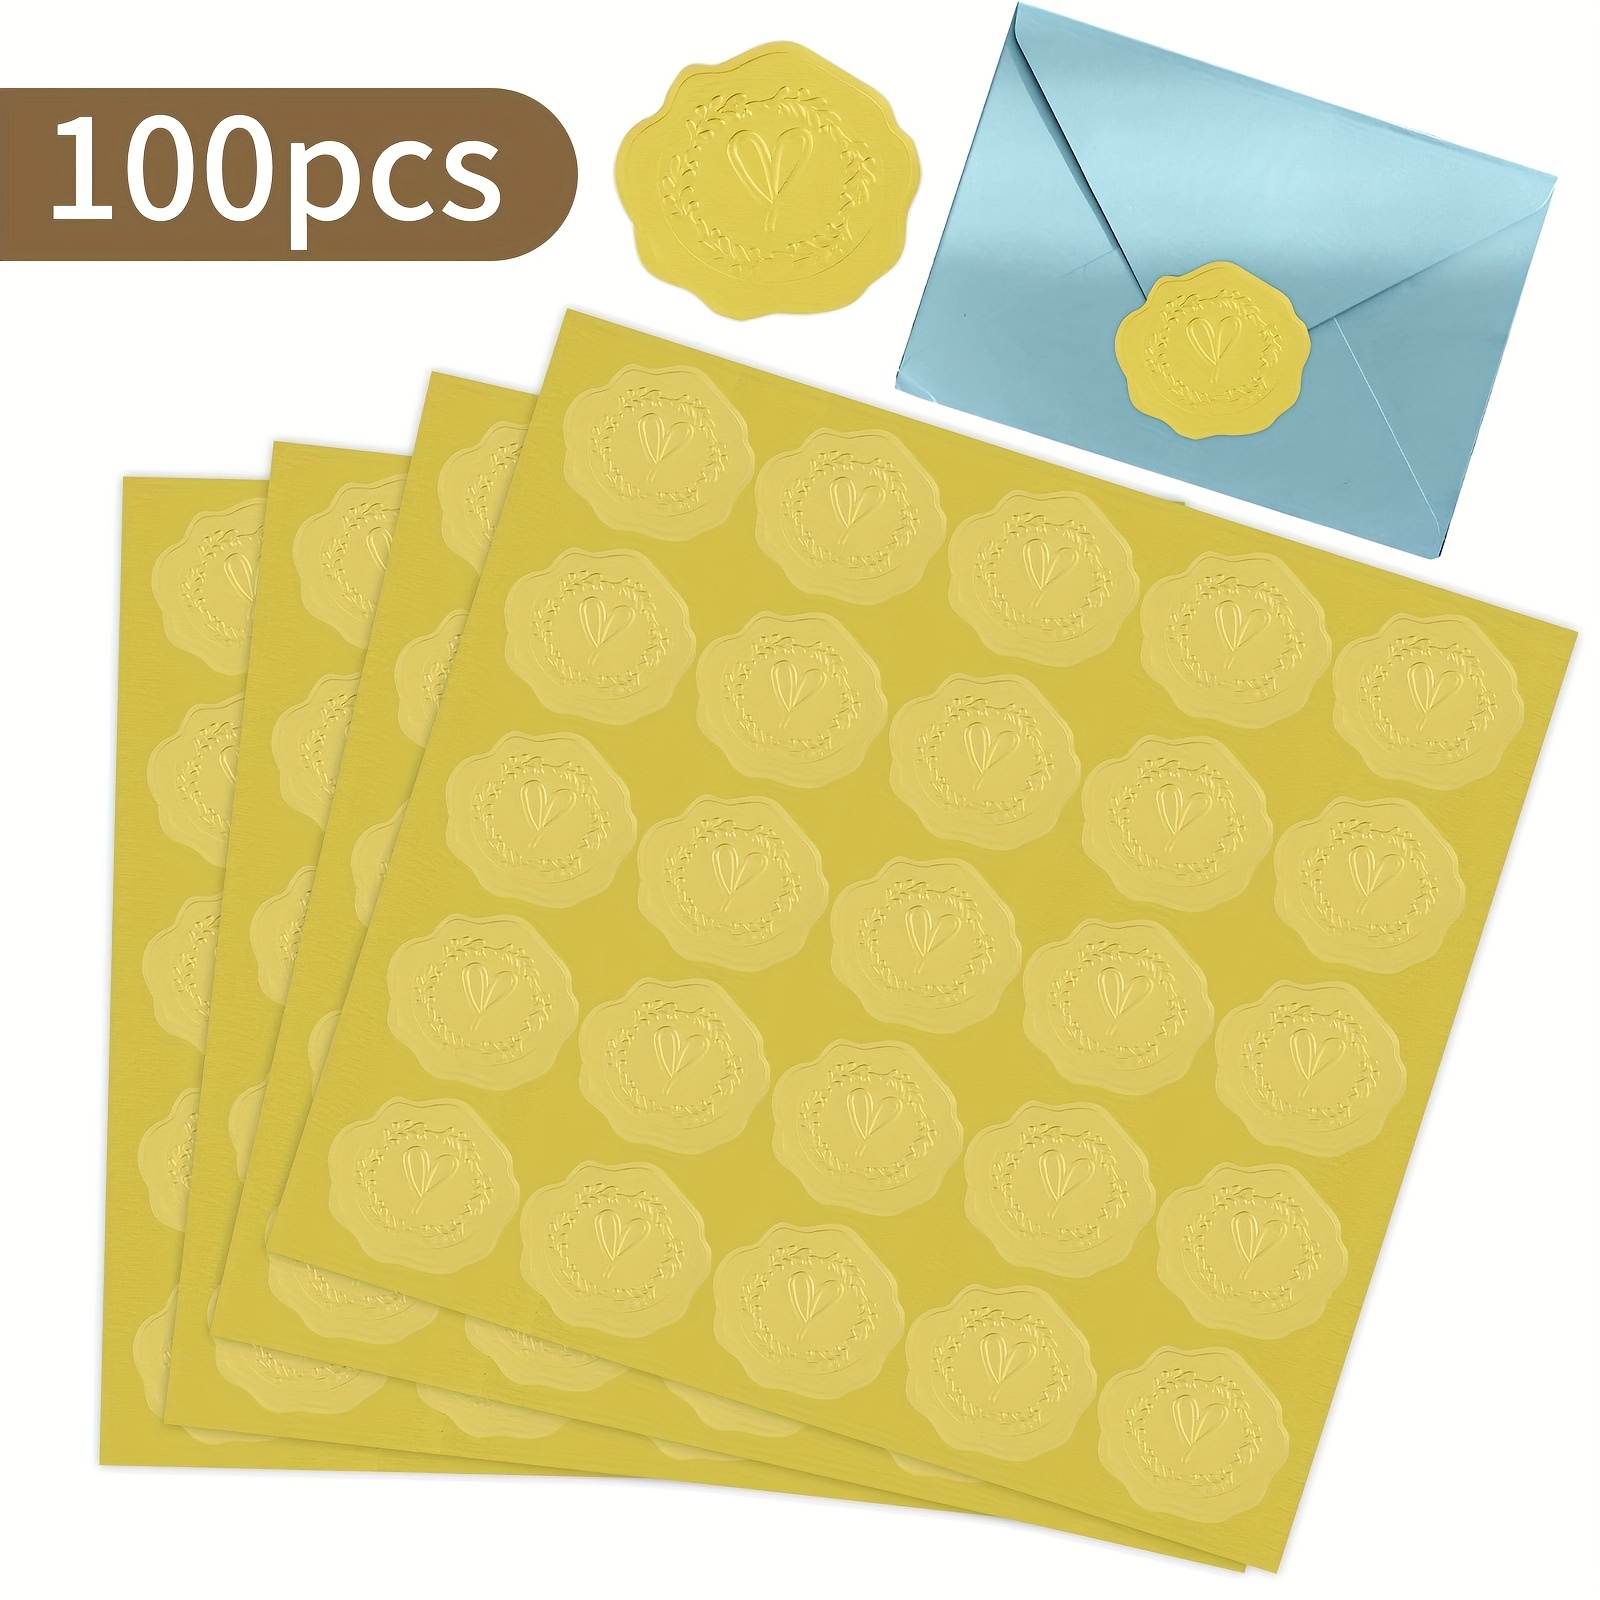 Wax Seal Stickers Envelope Seal Stickers Wedding Invitation Envelope Seals  Self Adhesive Gold Stickers for Party Invitaion, Christmas, Gift Wrapping